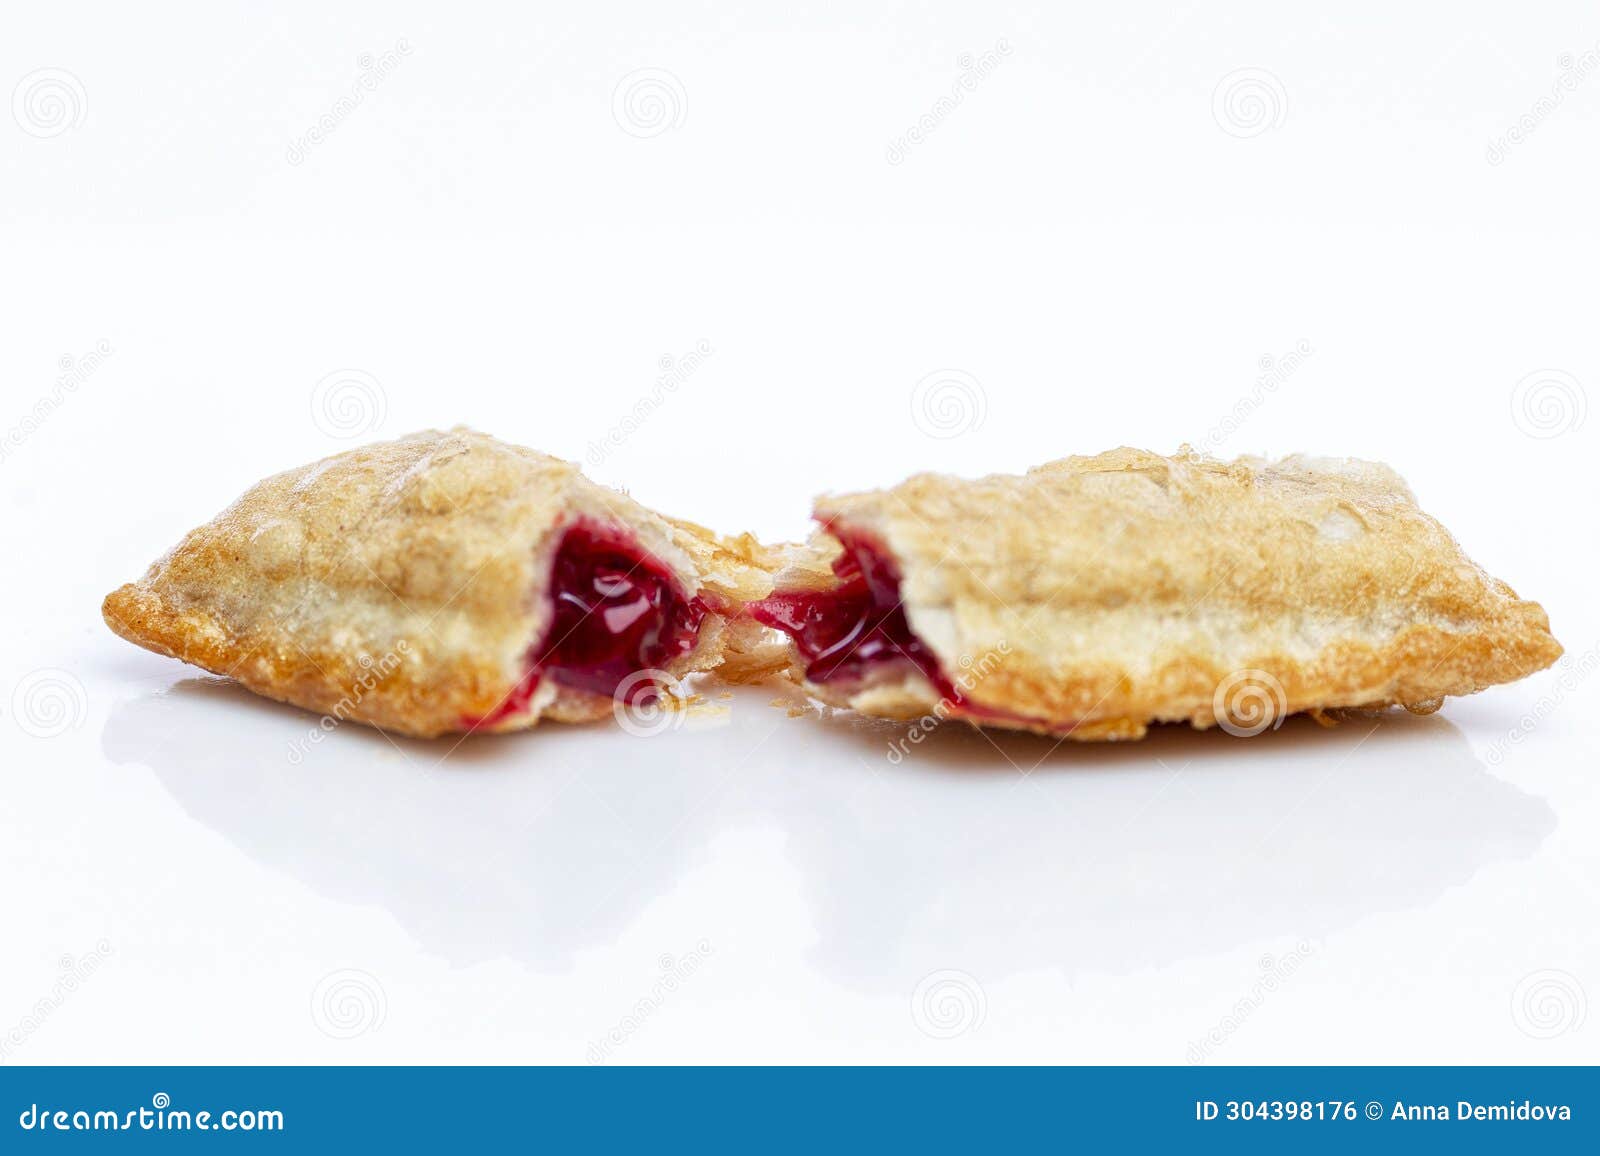 mcdonald's cherry pie. delicious garbage food and a quick pie.